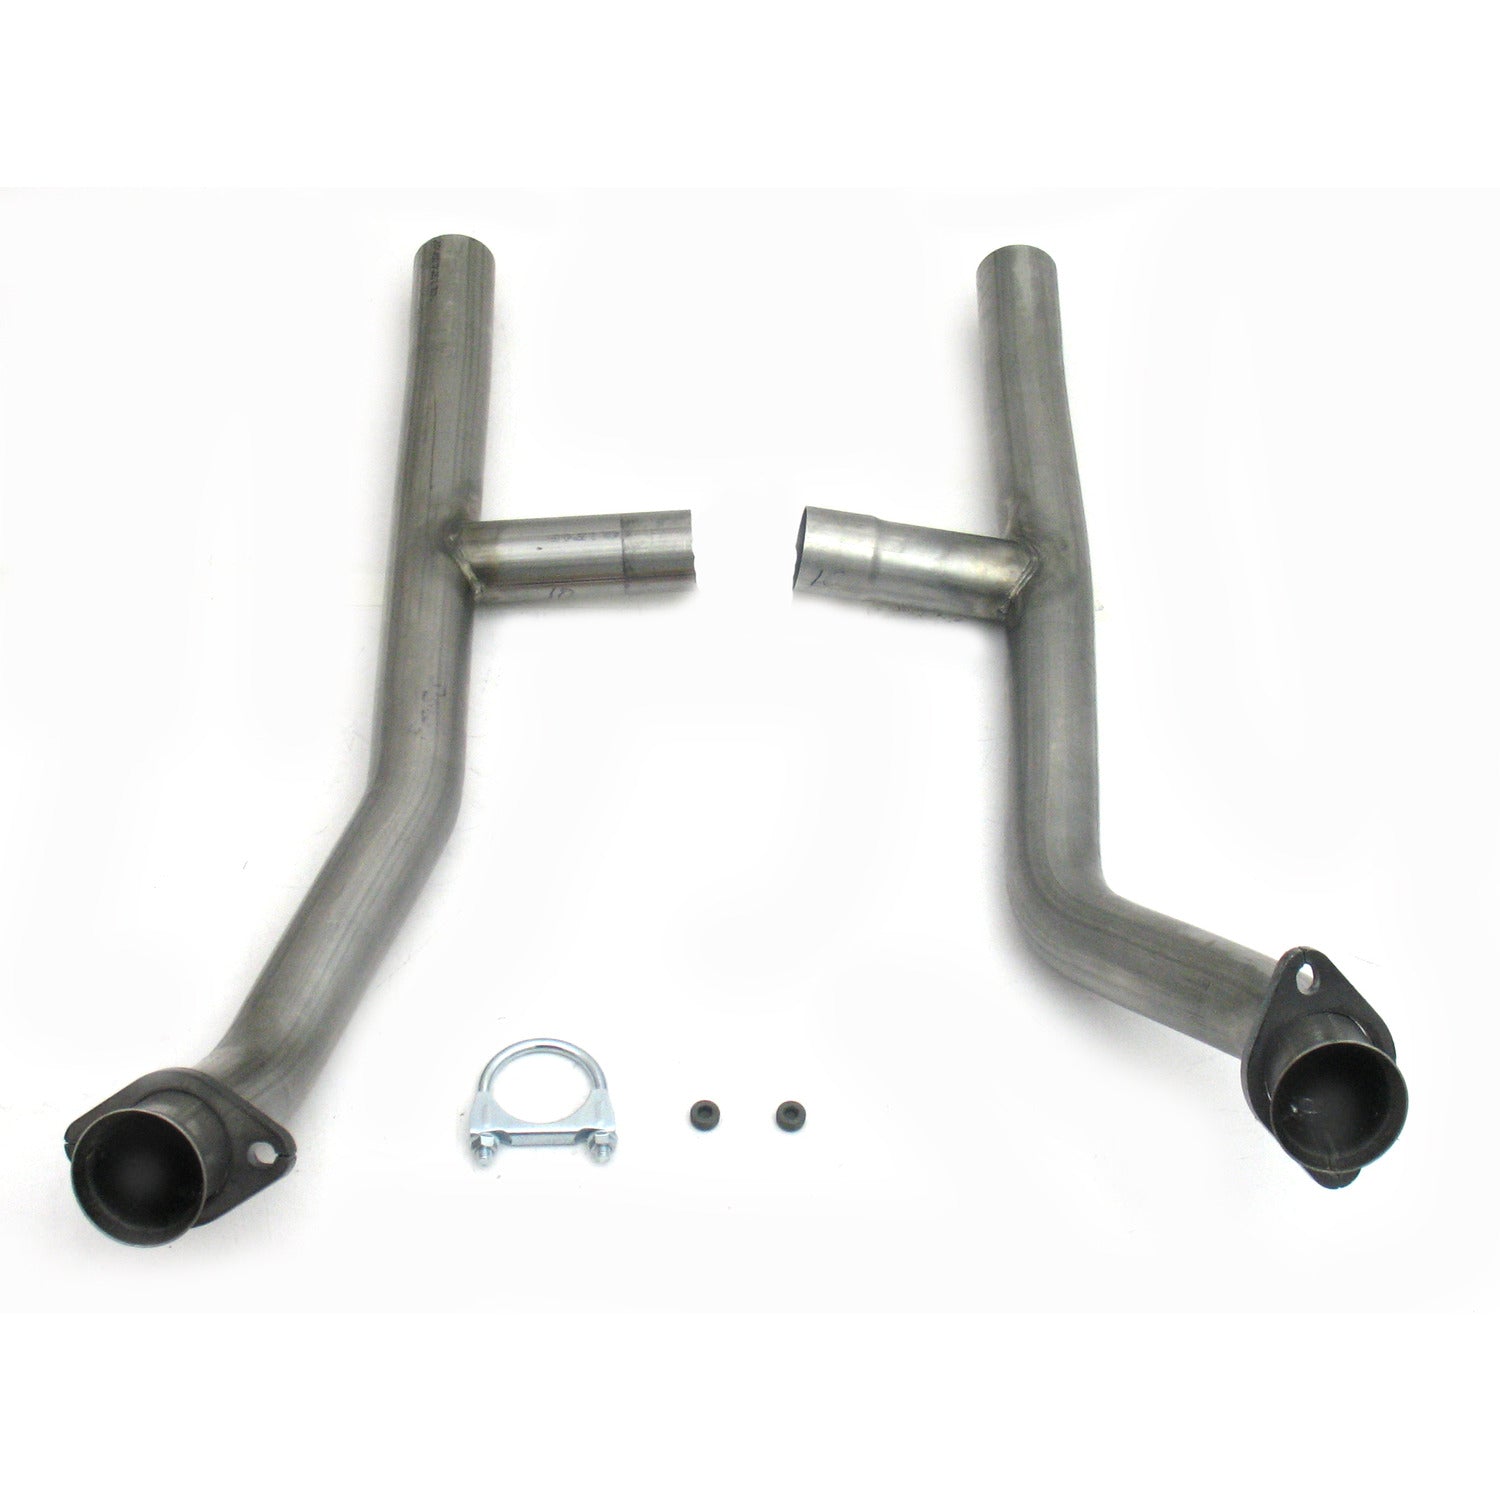 JBA Performance Exhaust 1650SH 2.5" Stainless Steel Mid-Pipe H-Pipe for 1650, 289/302